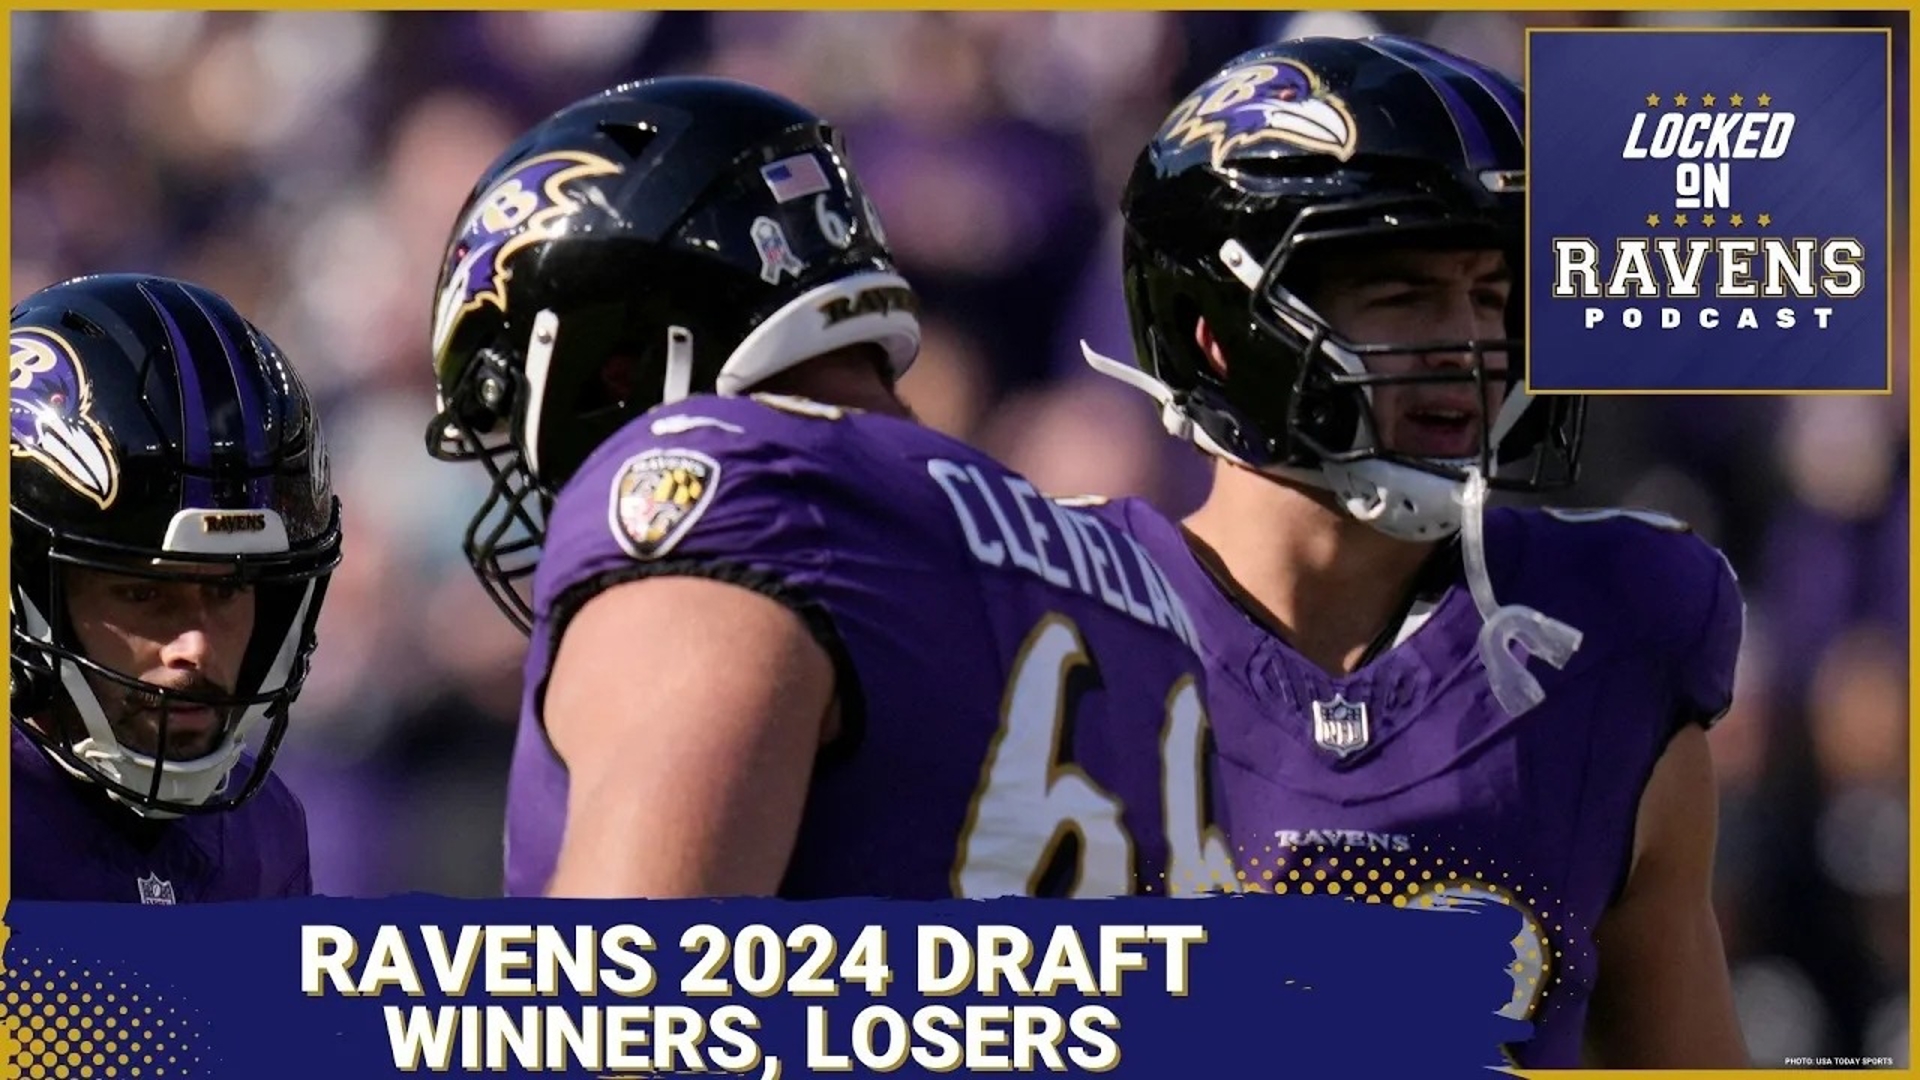 We look at the Baltimore Ravens' biggest winners and losers from the 2024 NFL draft, looking at who came out on top, who didn't and more.